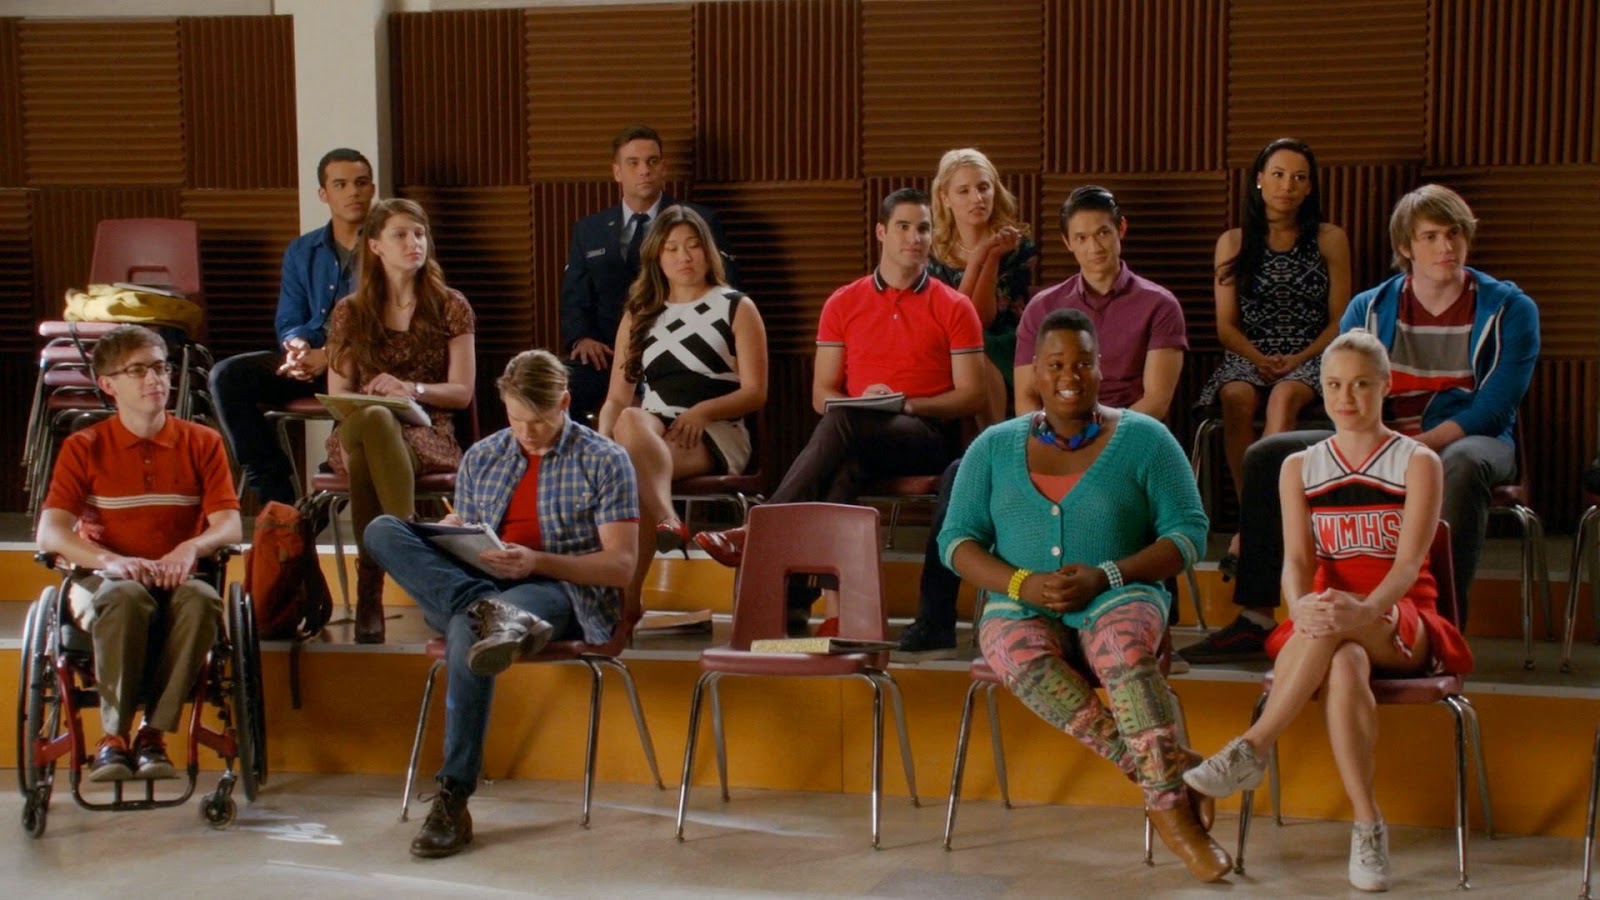 Recapping Shows: School Dazzzz but You Can't Stop Believin'-A Glee